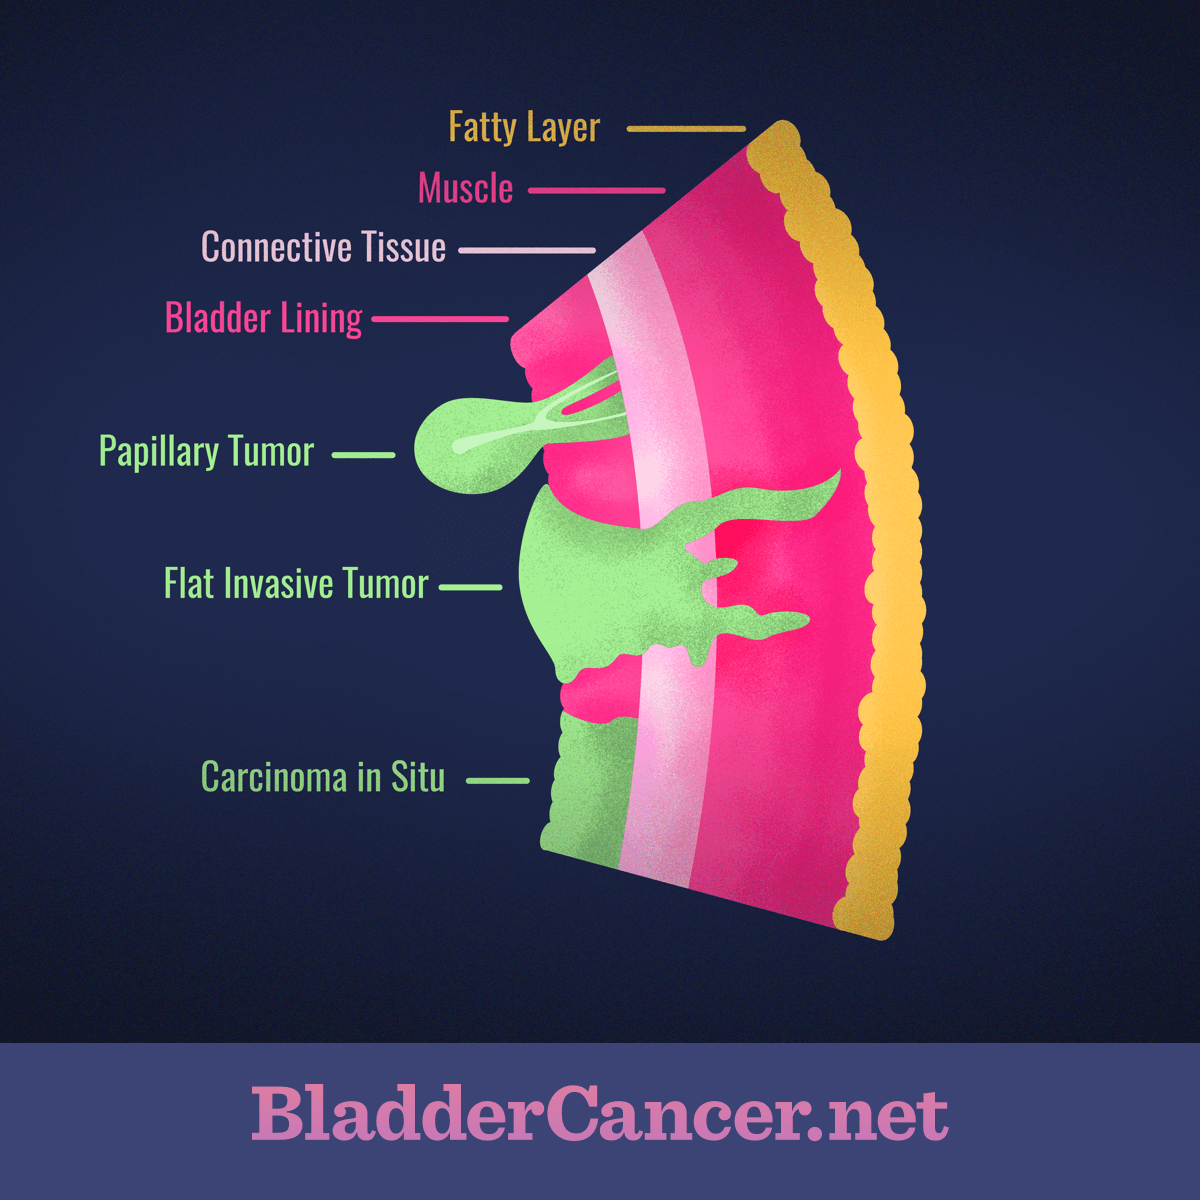 Layers in the bladder wall, from the inner lining to the fatty layer with different types of tumors.